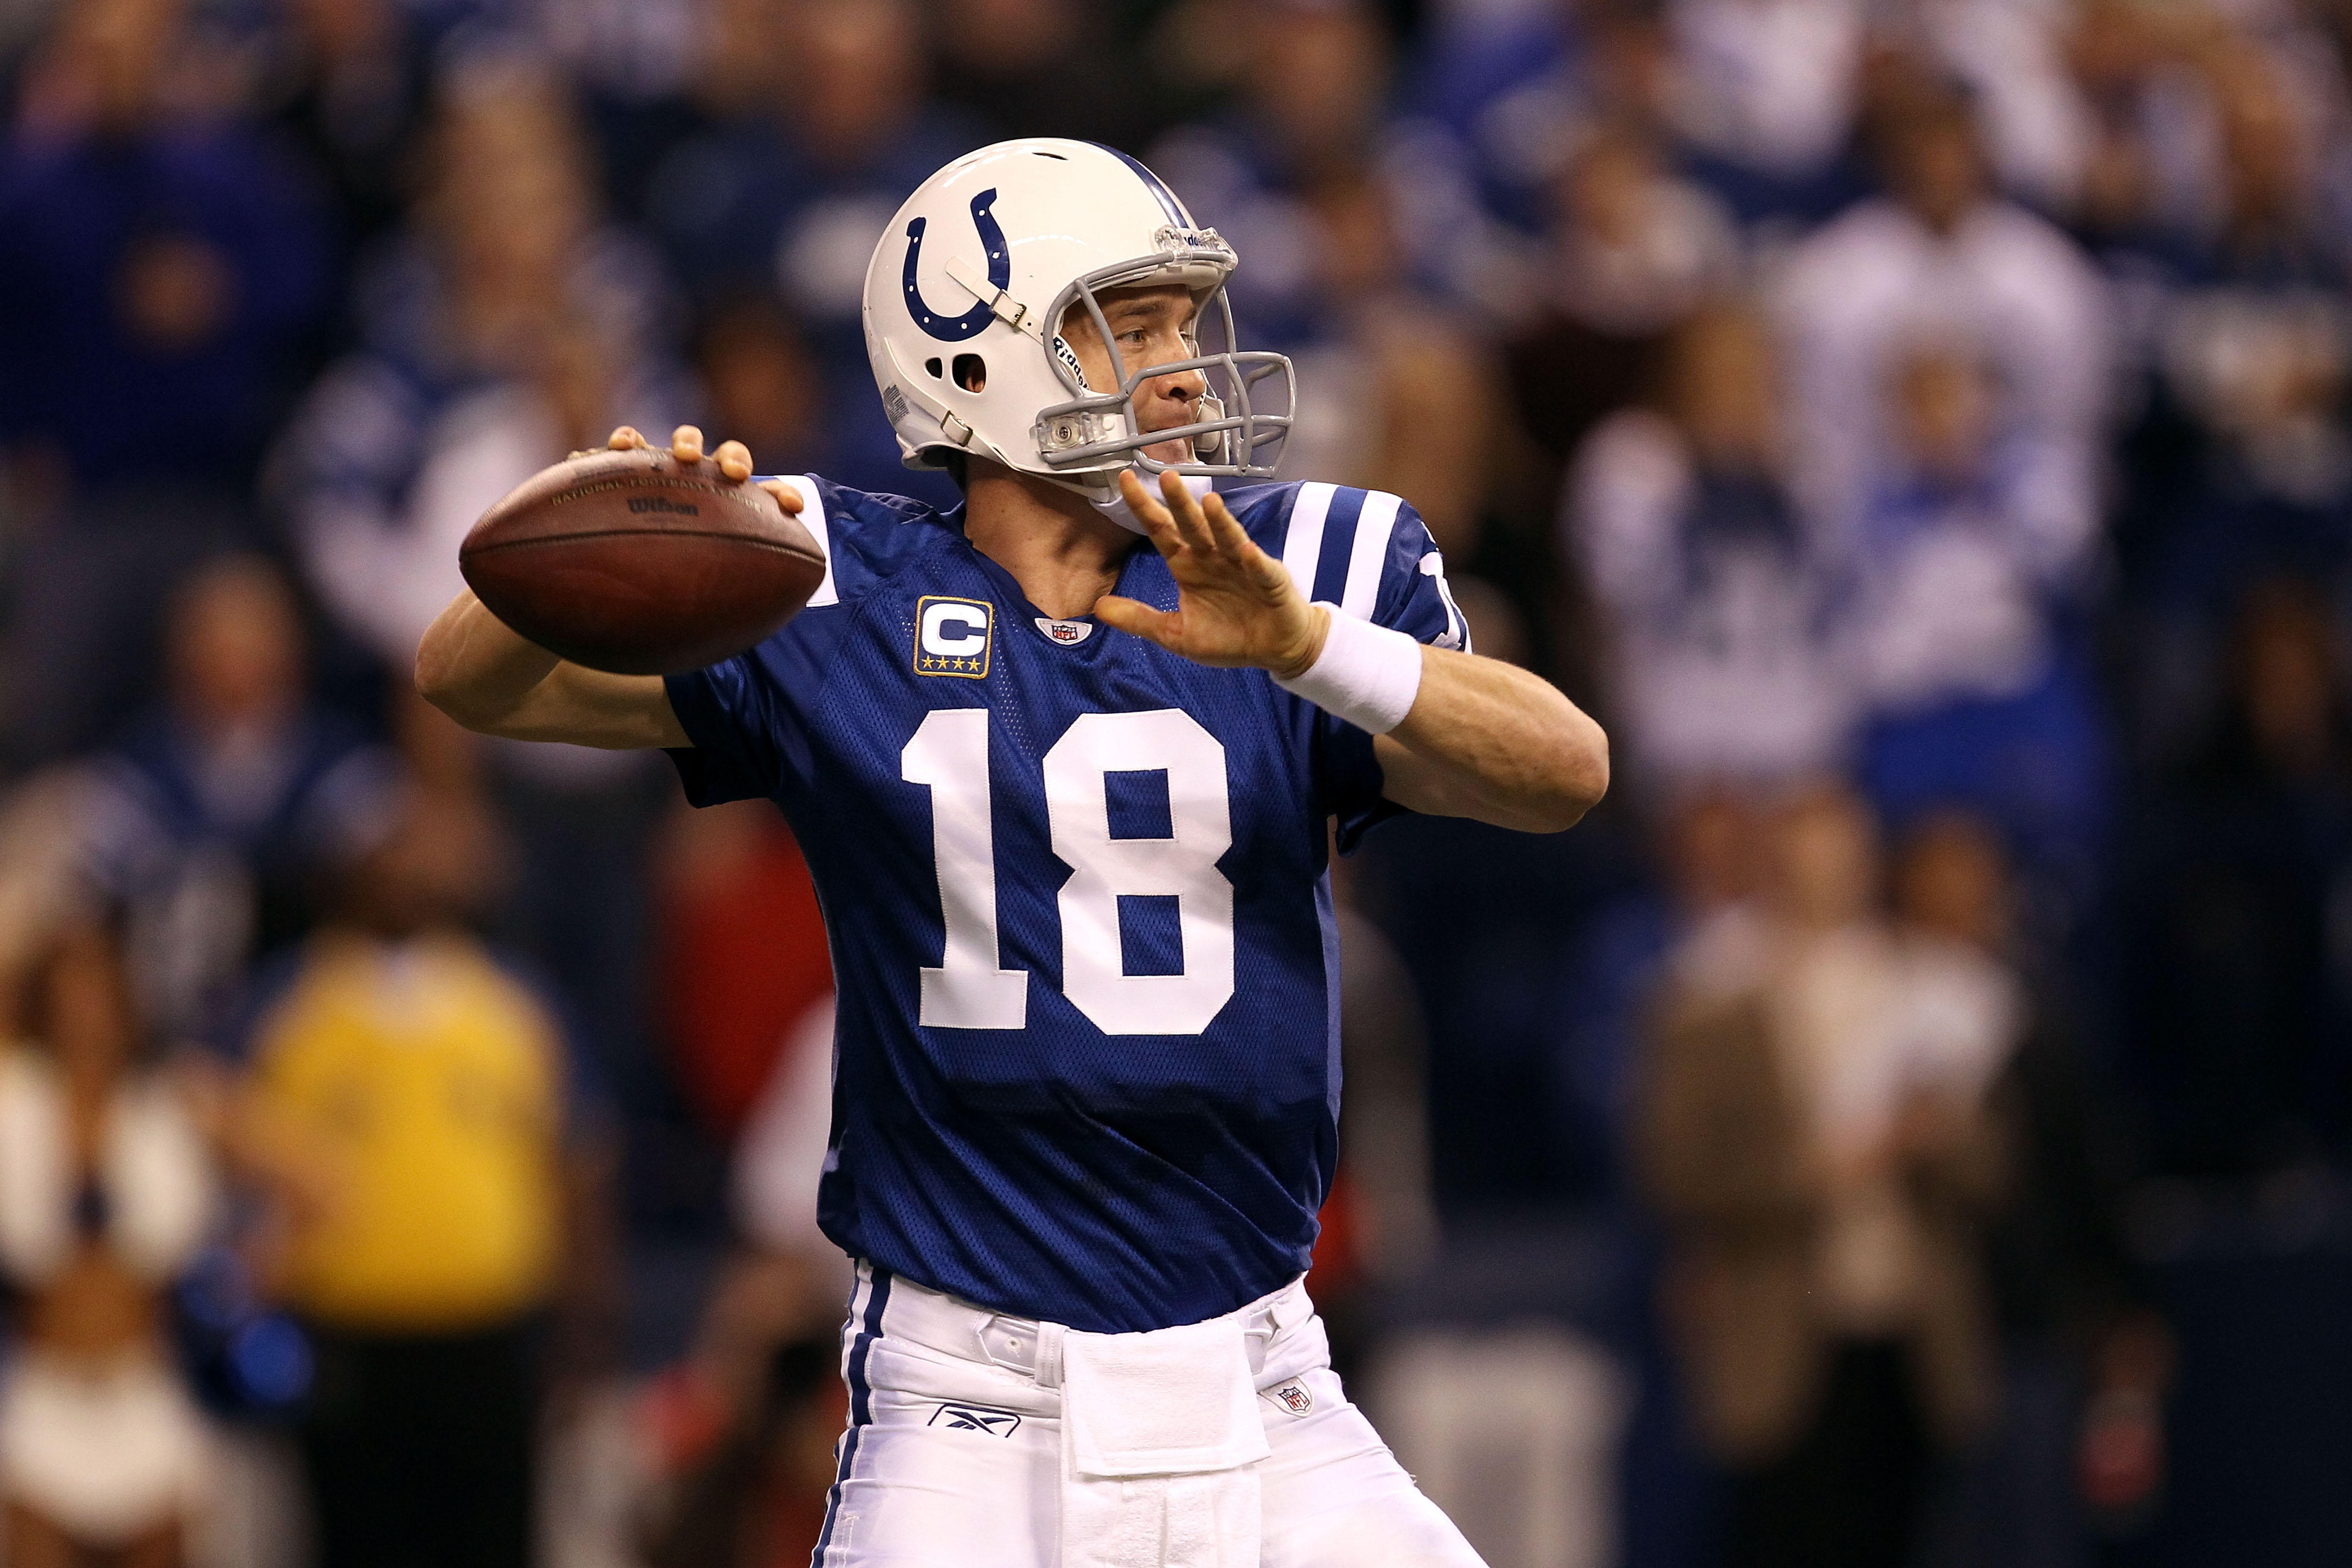 NFL: Peyton Manning's Top 10 Moments With the Indianapolis ...